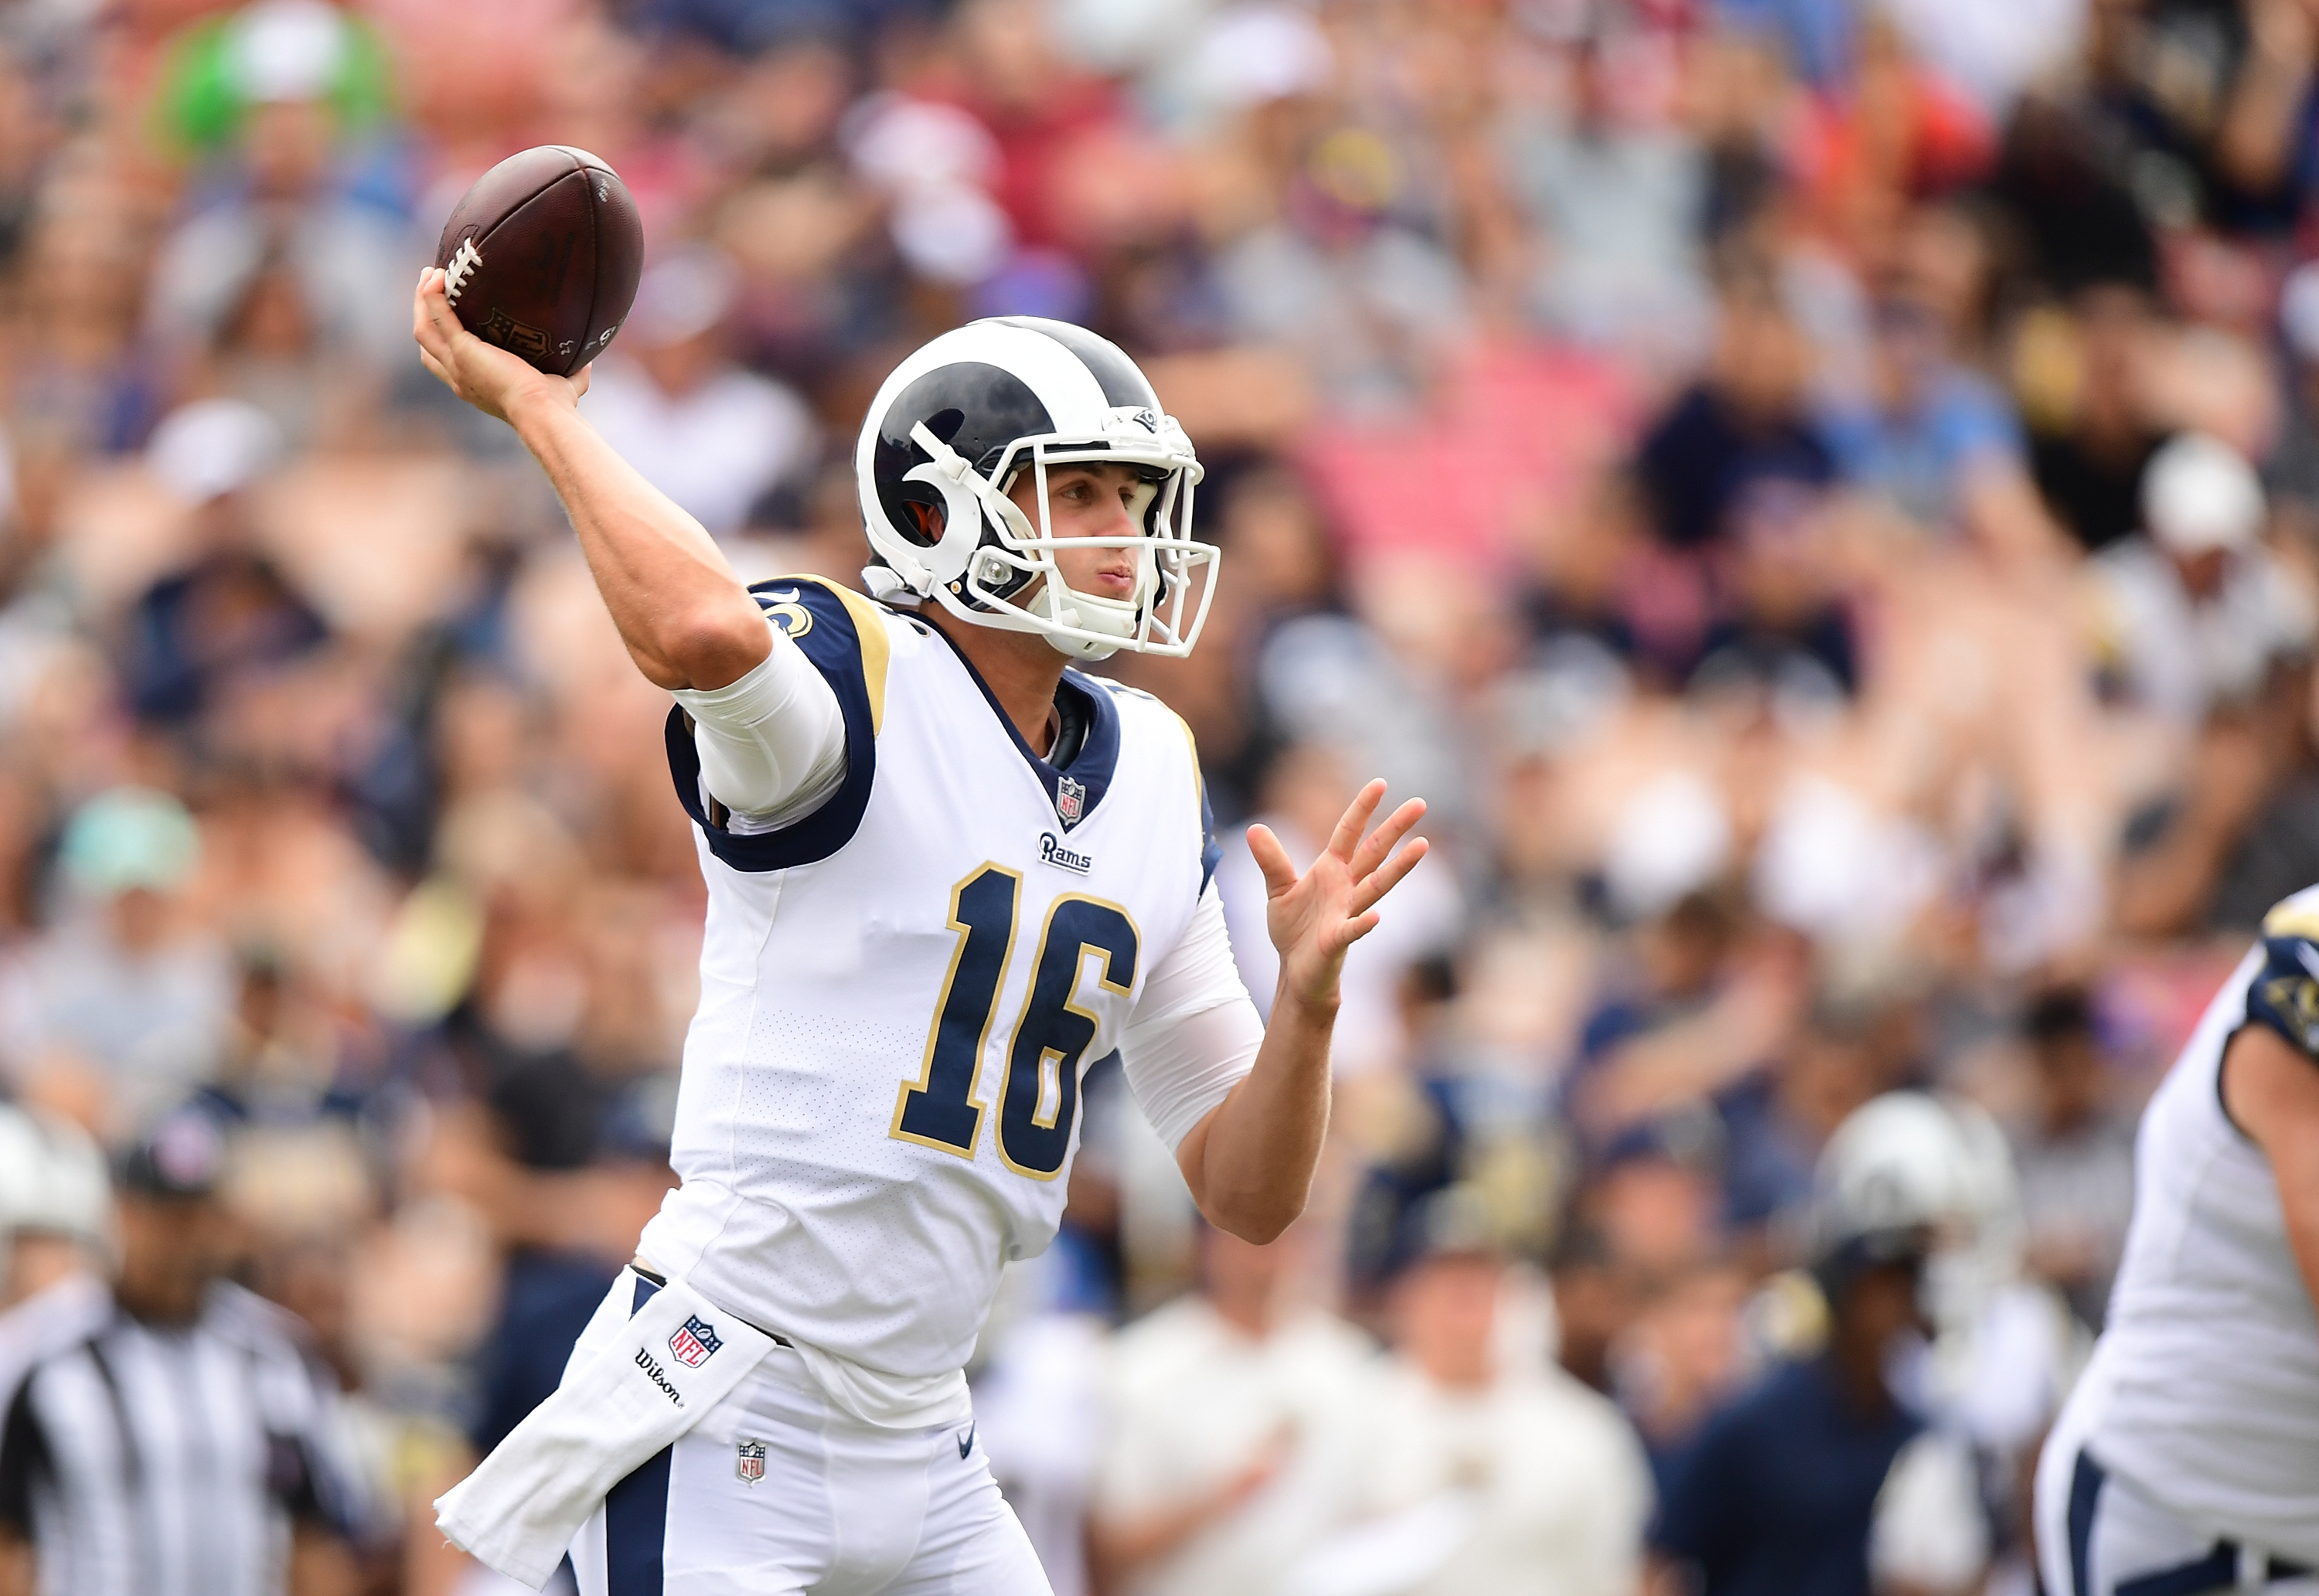 LOS ANGELES, CA - SEPTEMBER 17: Jared Goff #16 of the Los Angeles Rams throws the ball during the first quarter against the Washington Redskins at Los Angeles Memorial Coliseum on September 17, 2017 in Los Angeles, California. 